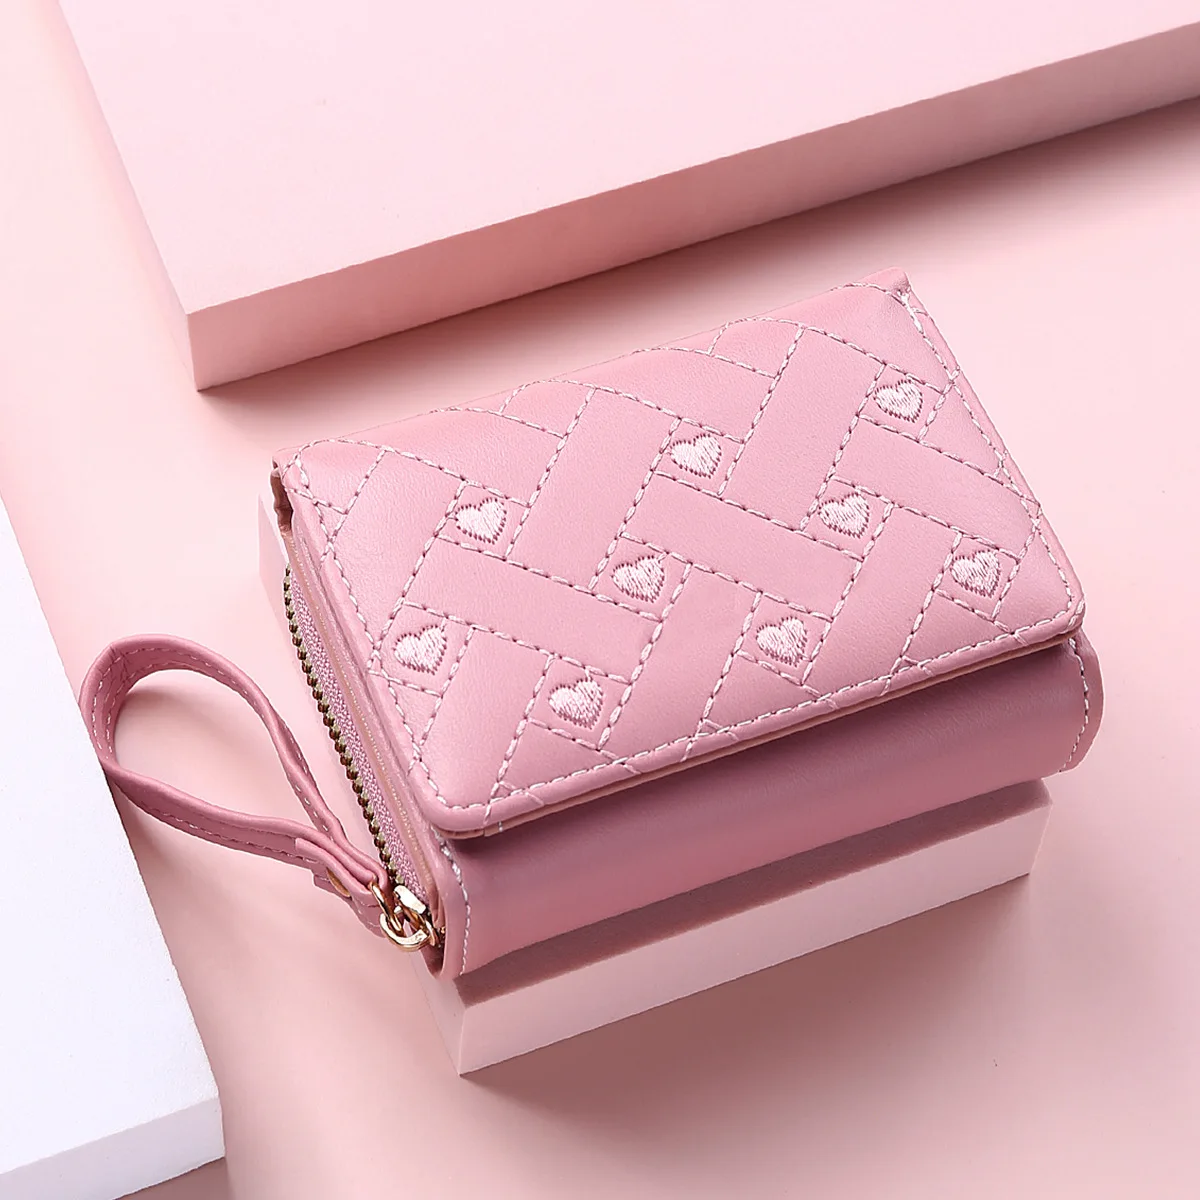 Embroidered Heart Wallets For Women Kawaii Cute Wallet Luxury Designer Lady Wallet Pink Purse Small Women Leather Coin Purse Bag